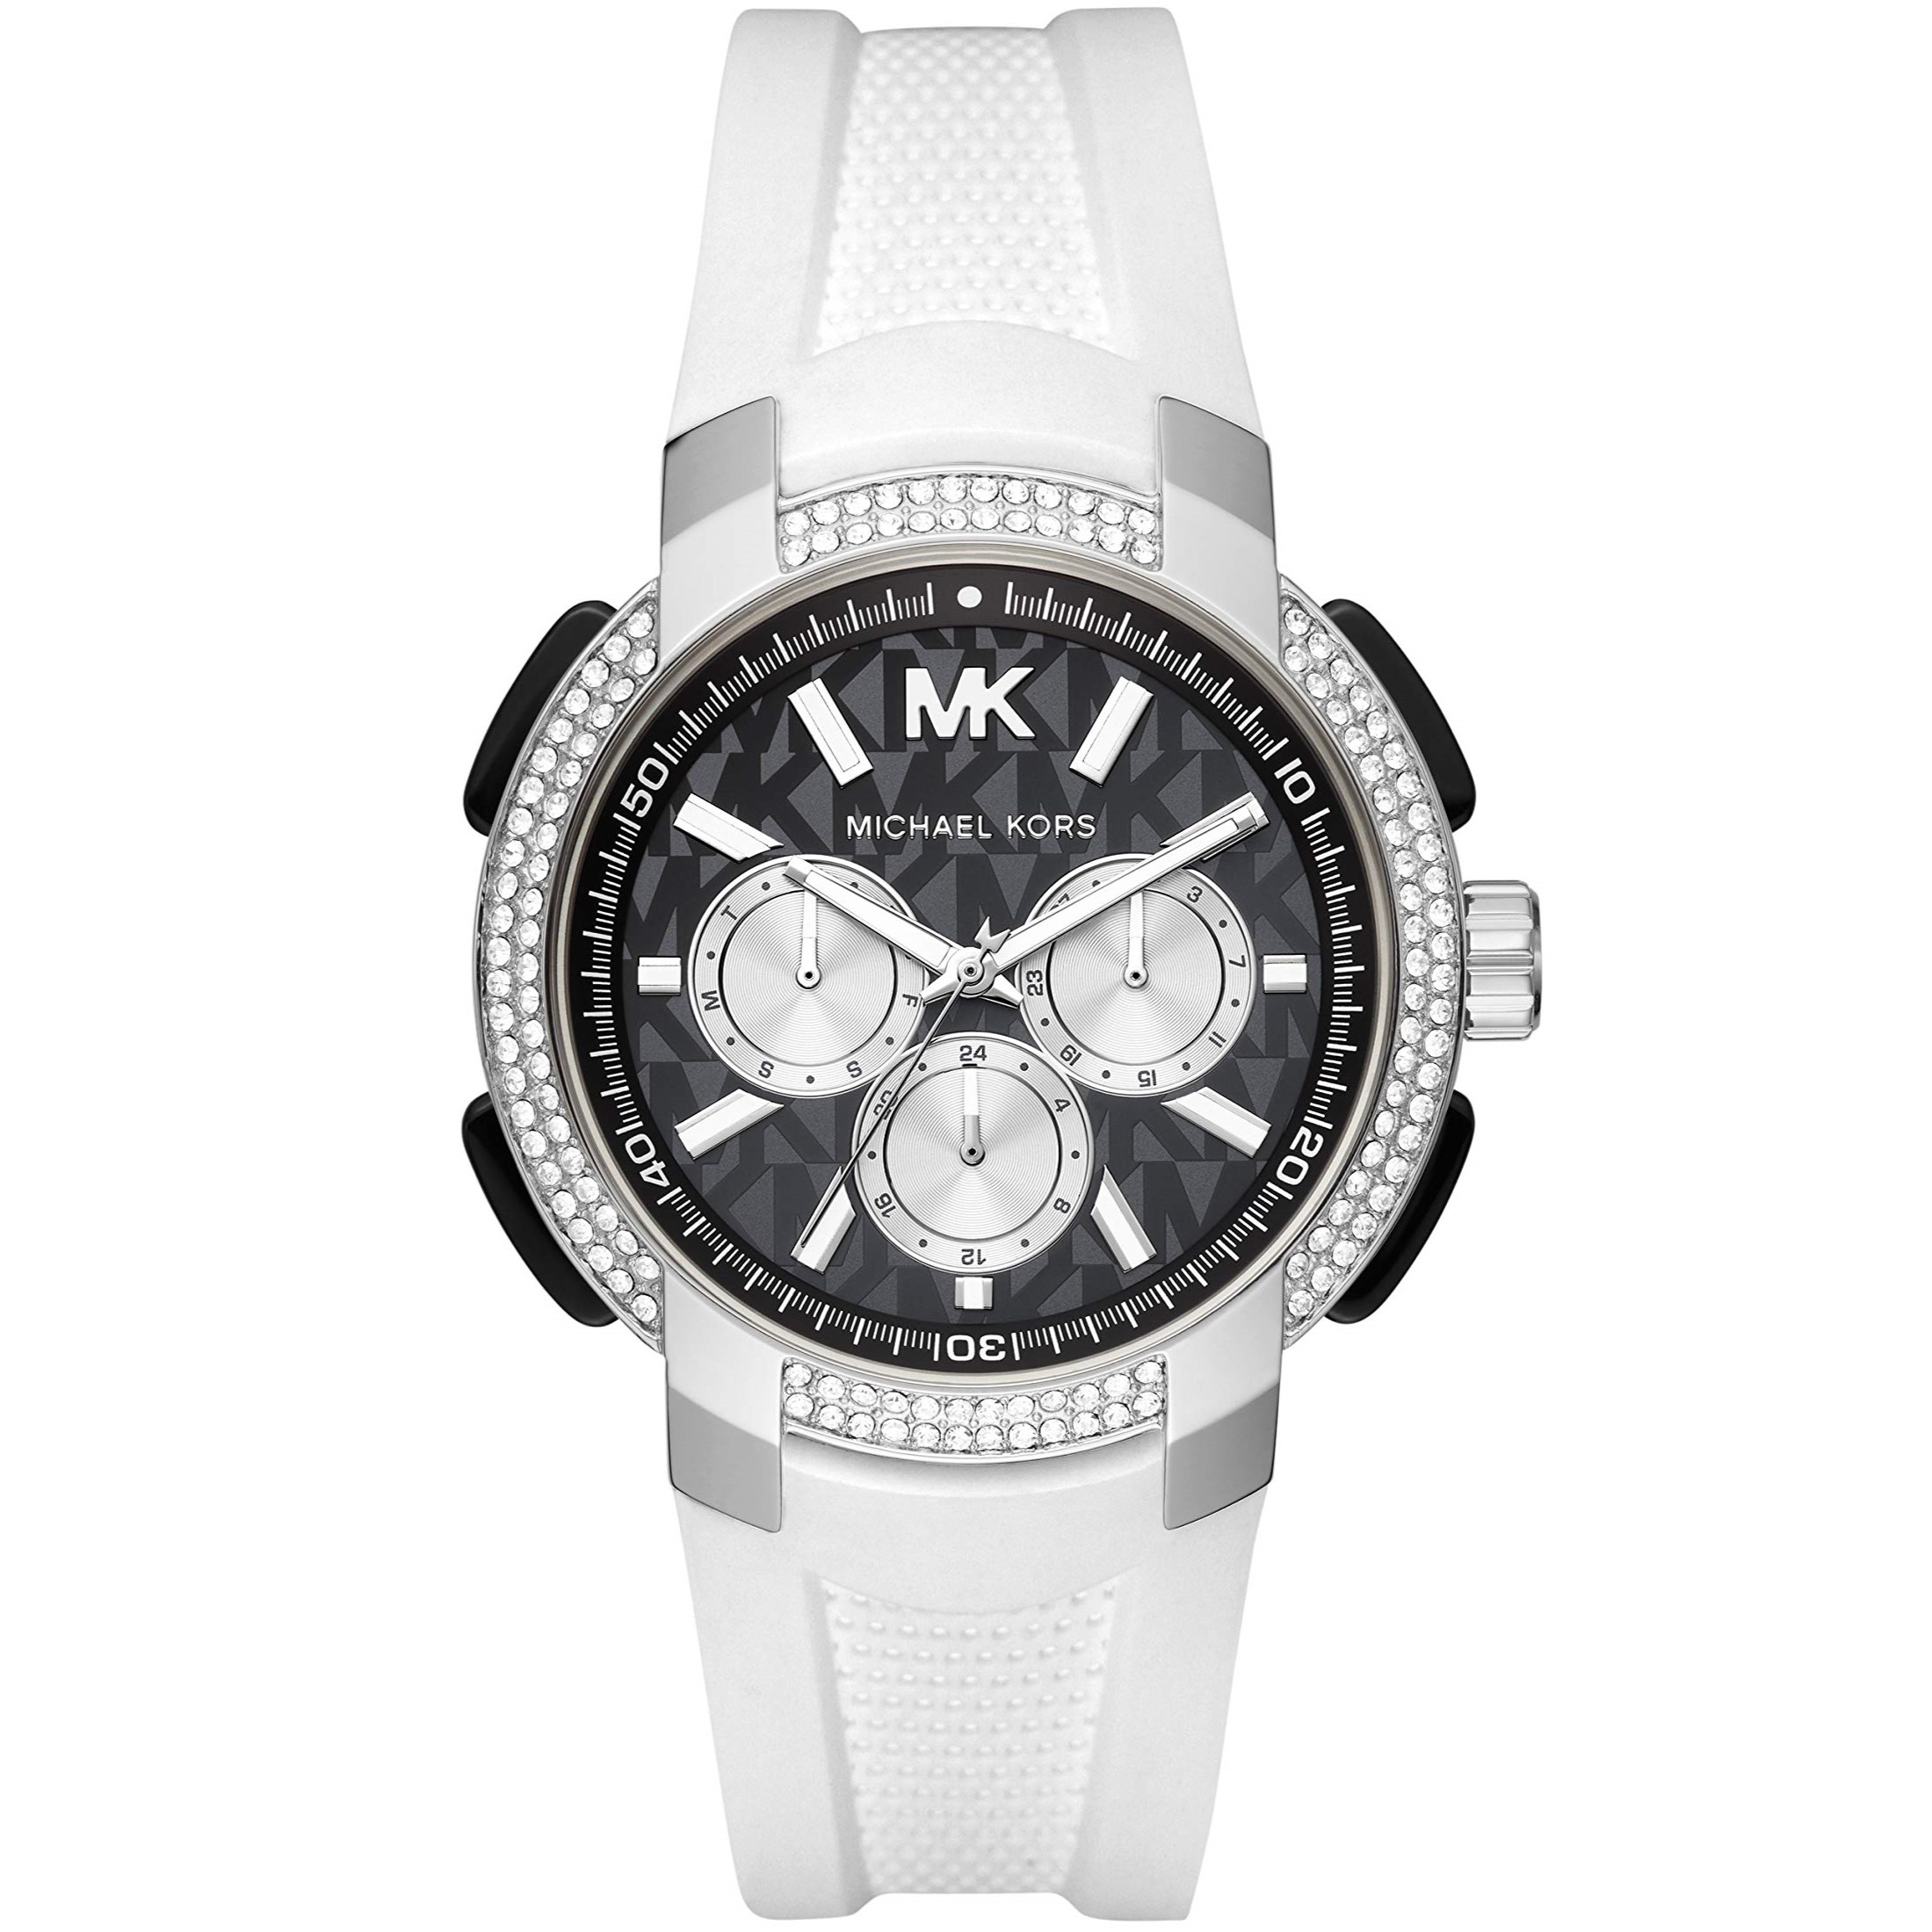 ĐỒNG HỒ MK NỮ MICHAEL KORS OVERSIZED PAVÉ SILVER-TONE AND SILICONE SPORT WATCH MK6947 4